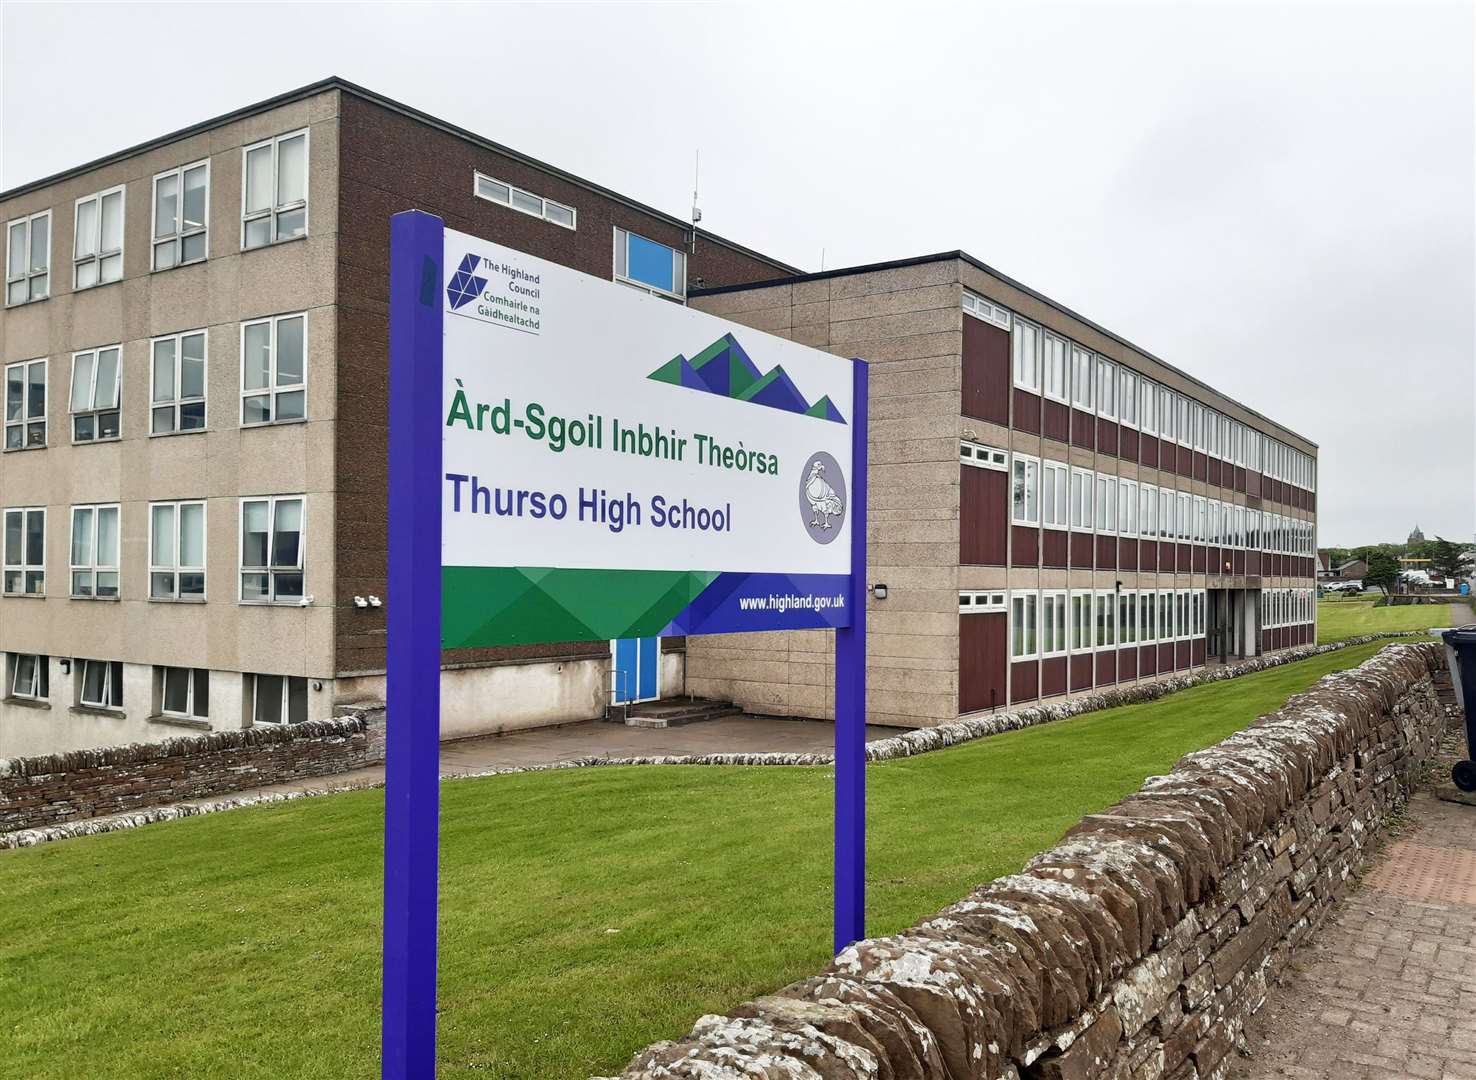 The three-storey extension block at Thurso High School has been out of use since significant structural defects were found in October last year.